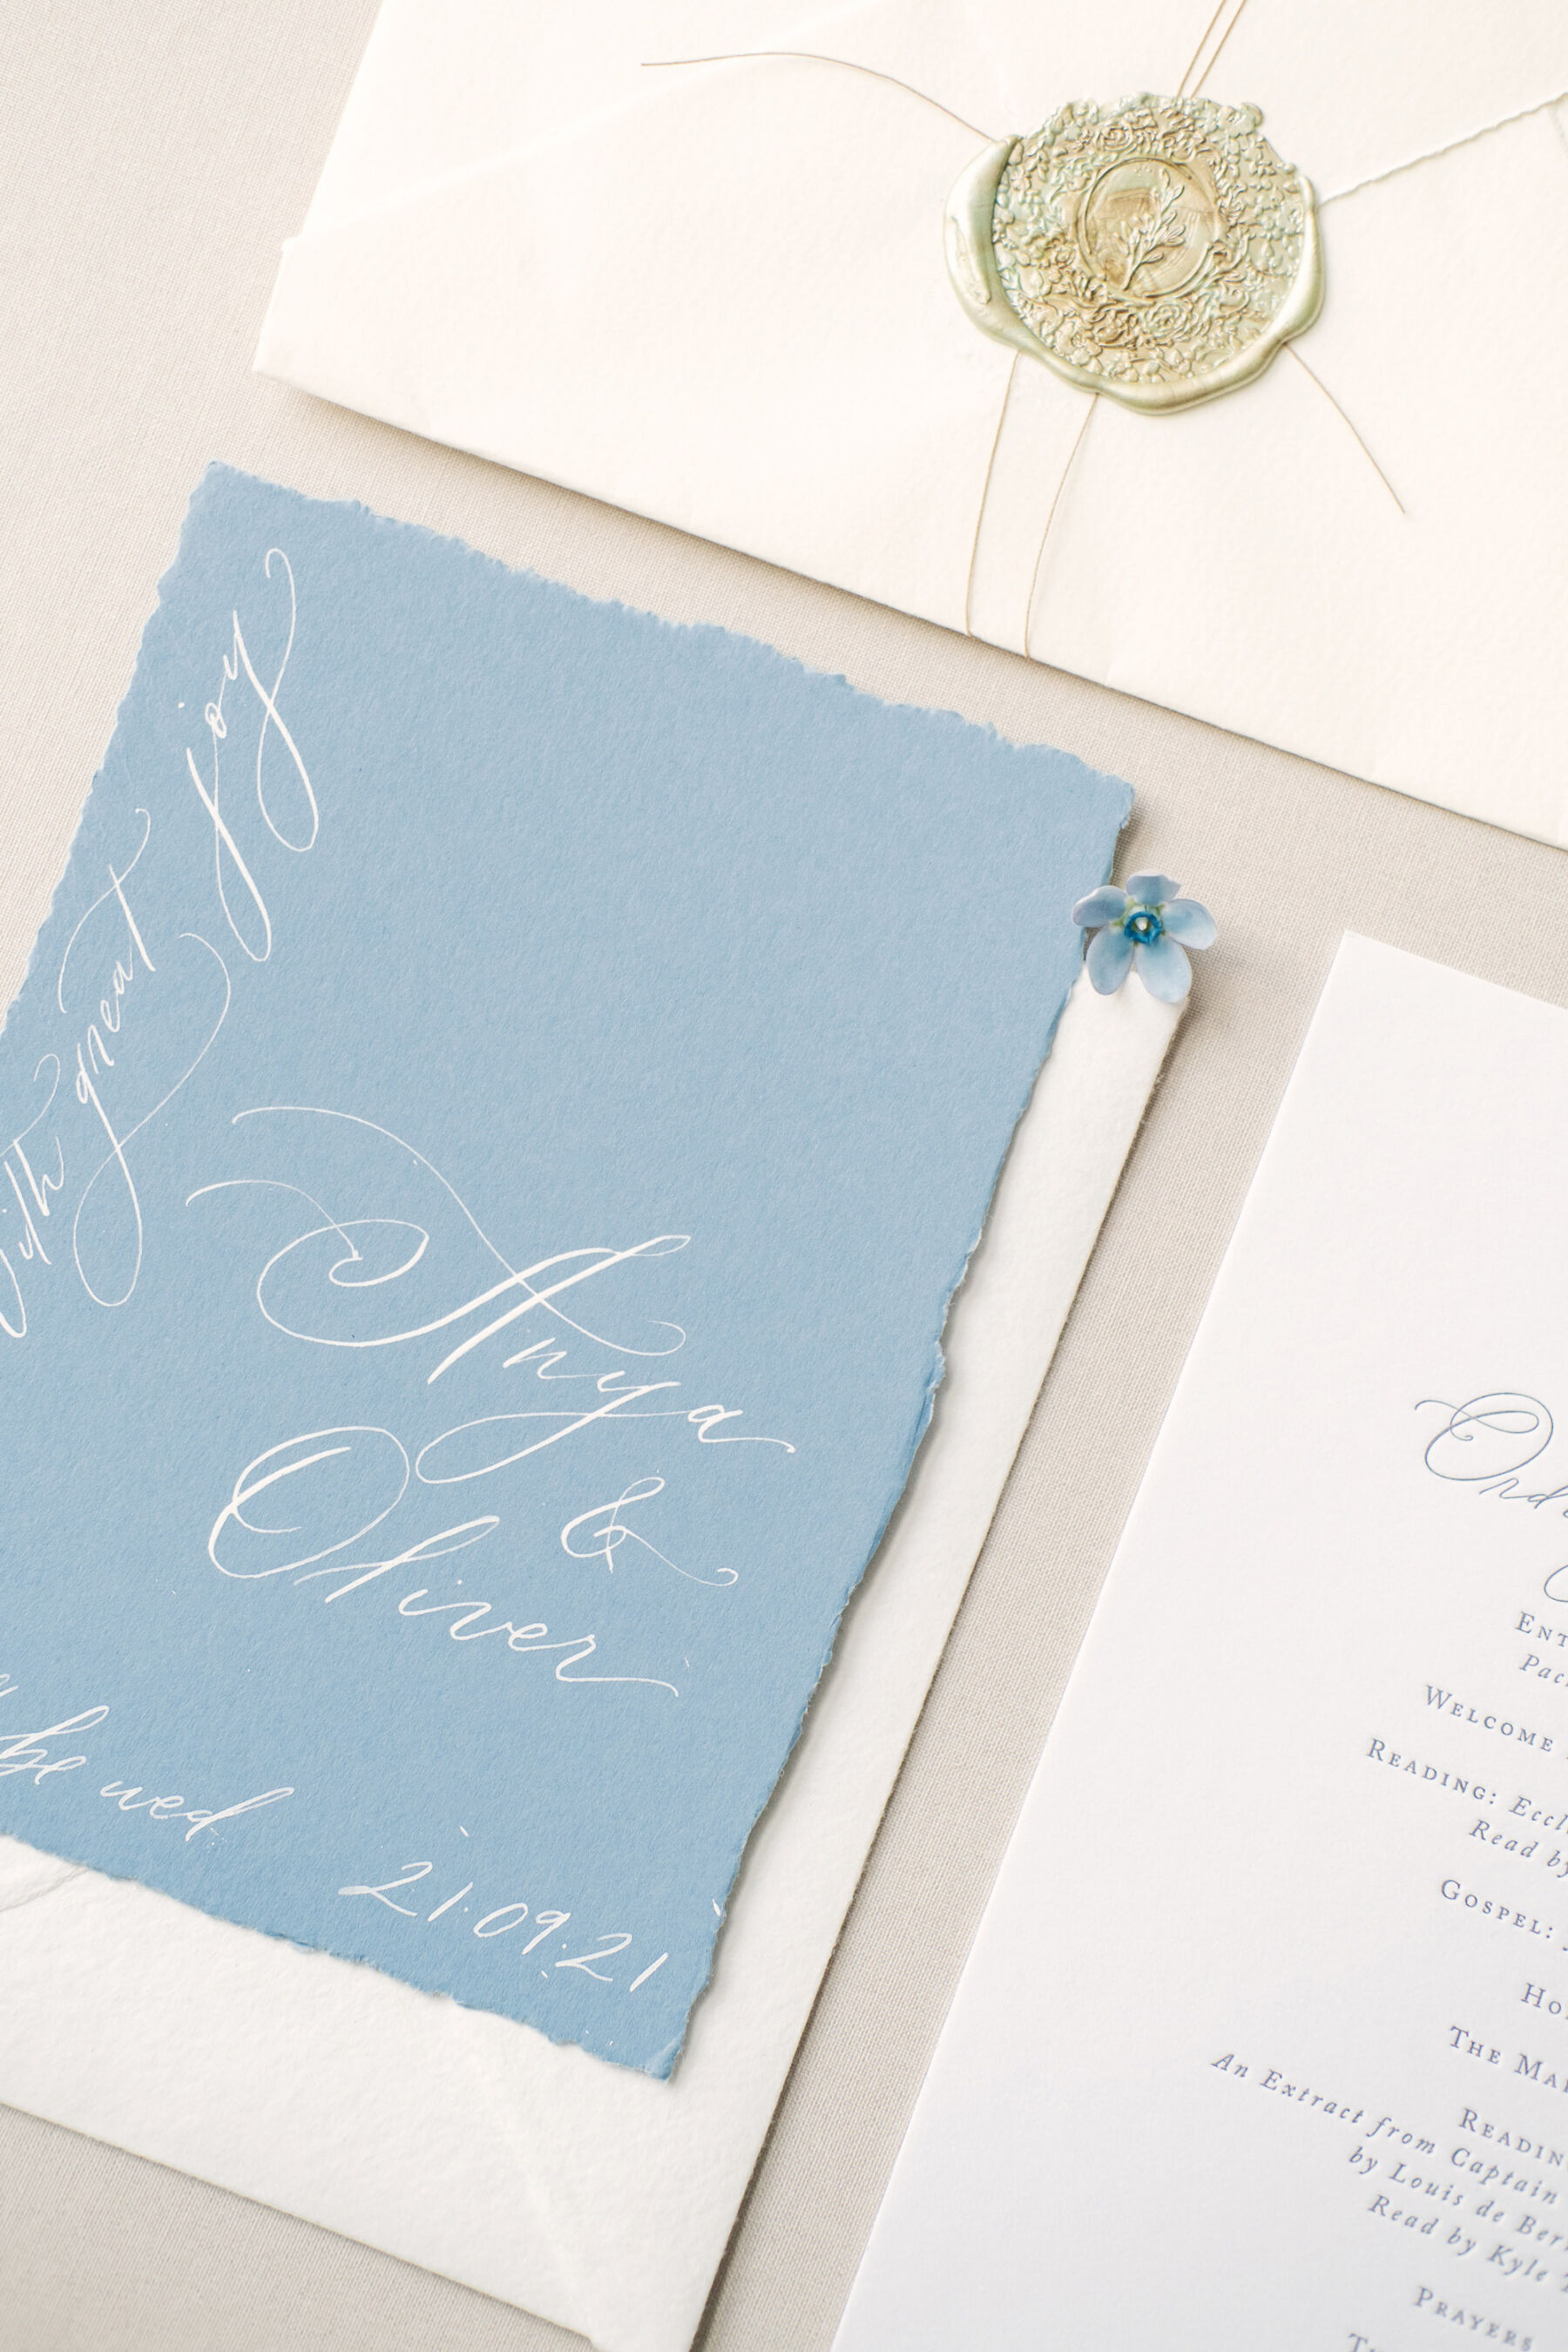 Pale blue wedding stationery with white ink calligraphy & gold wax stamp.